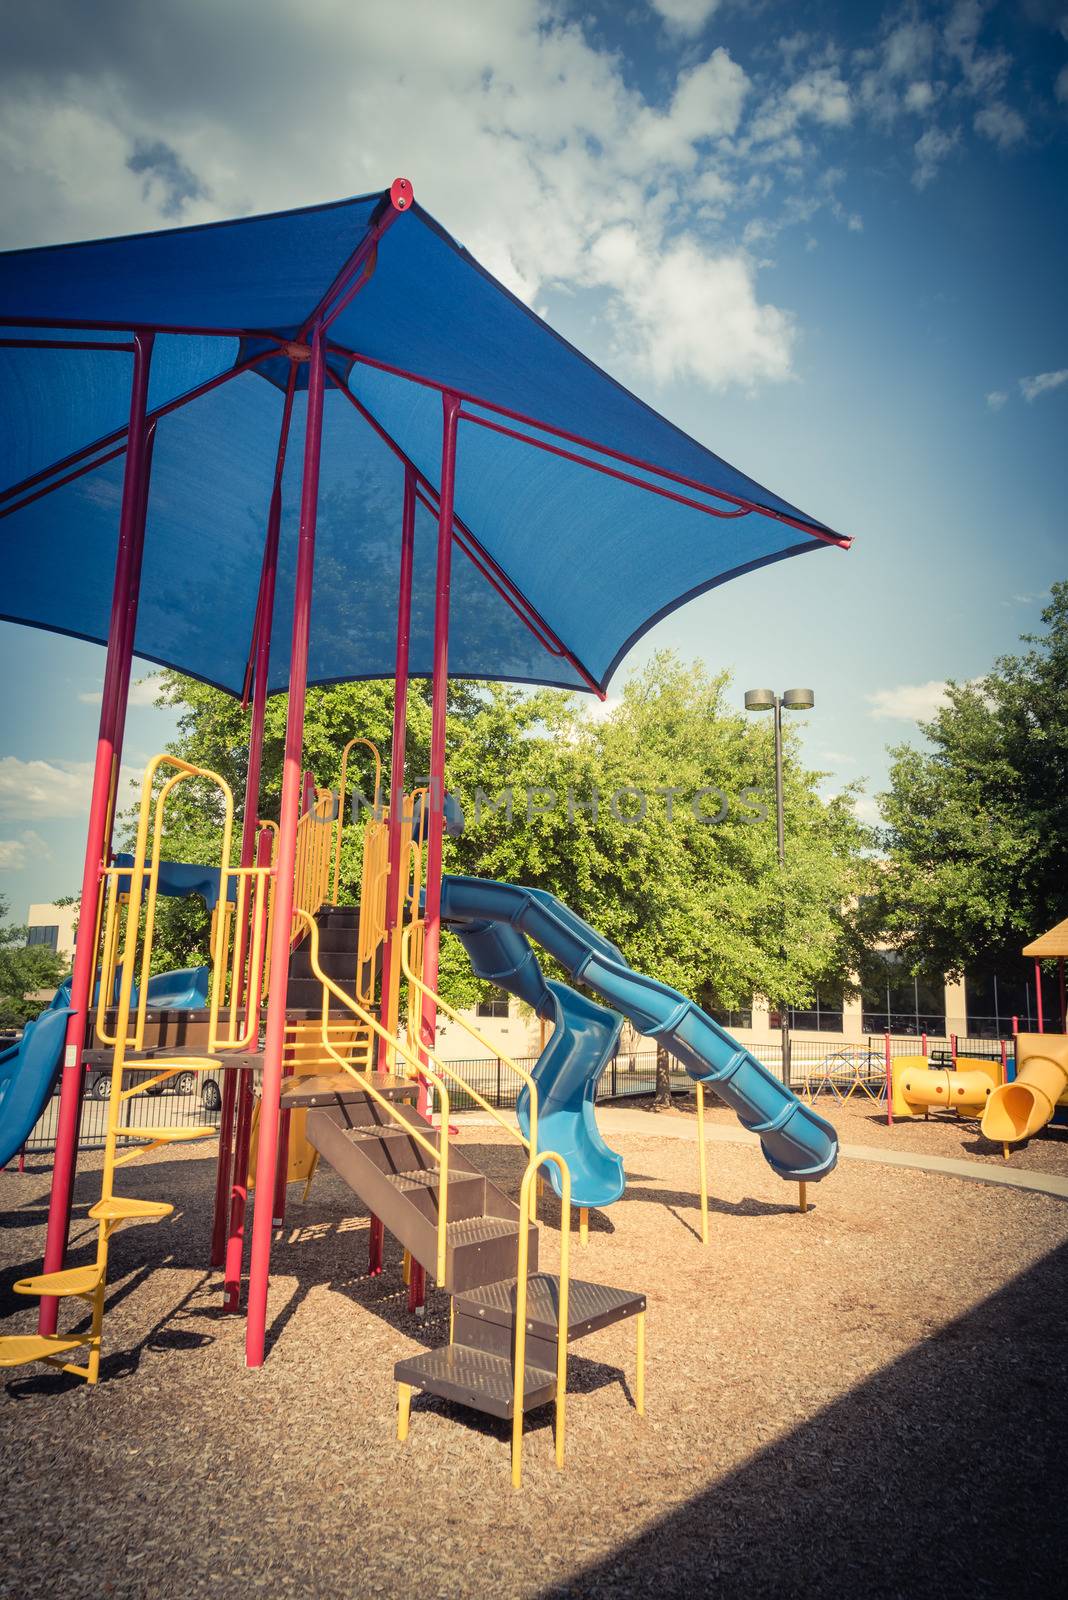 Vintage tone a colorful playground near community recreation facility in Texas, America